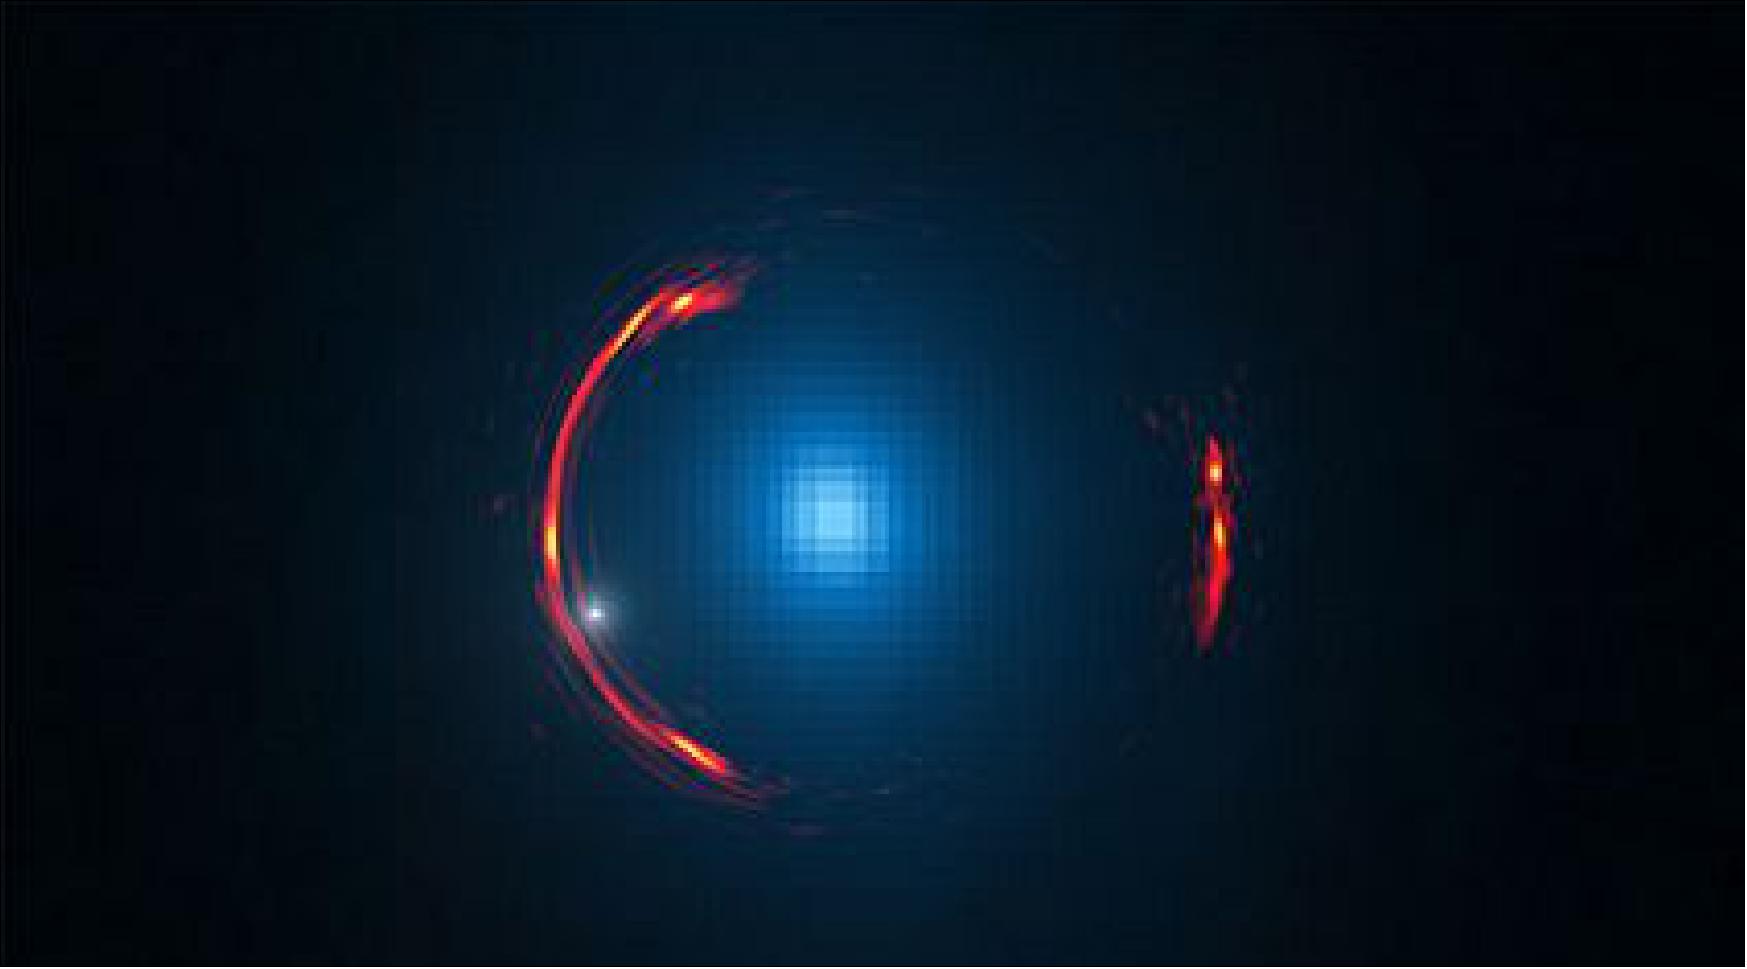 Figure 51: Composite image of the gravitational lens SDP.81 showing the distorted ALMA image of the more distant galaxy (red arcs) and the Hubble optical image of the nearby lensing galaxy (blue center object). By analyzing the distortions in the ring, astronomers have determined that a dark dwarf galaxy (data indicated by white dot near left lower arc segment) is lurking nearly 4 billion light-years away (image credit: Y. Hezaveh, Stanford University; ALMA (NRAO/ESO/NAOJ); NASA/ESA Hubble Space Telescope)